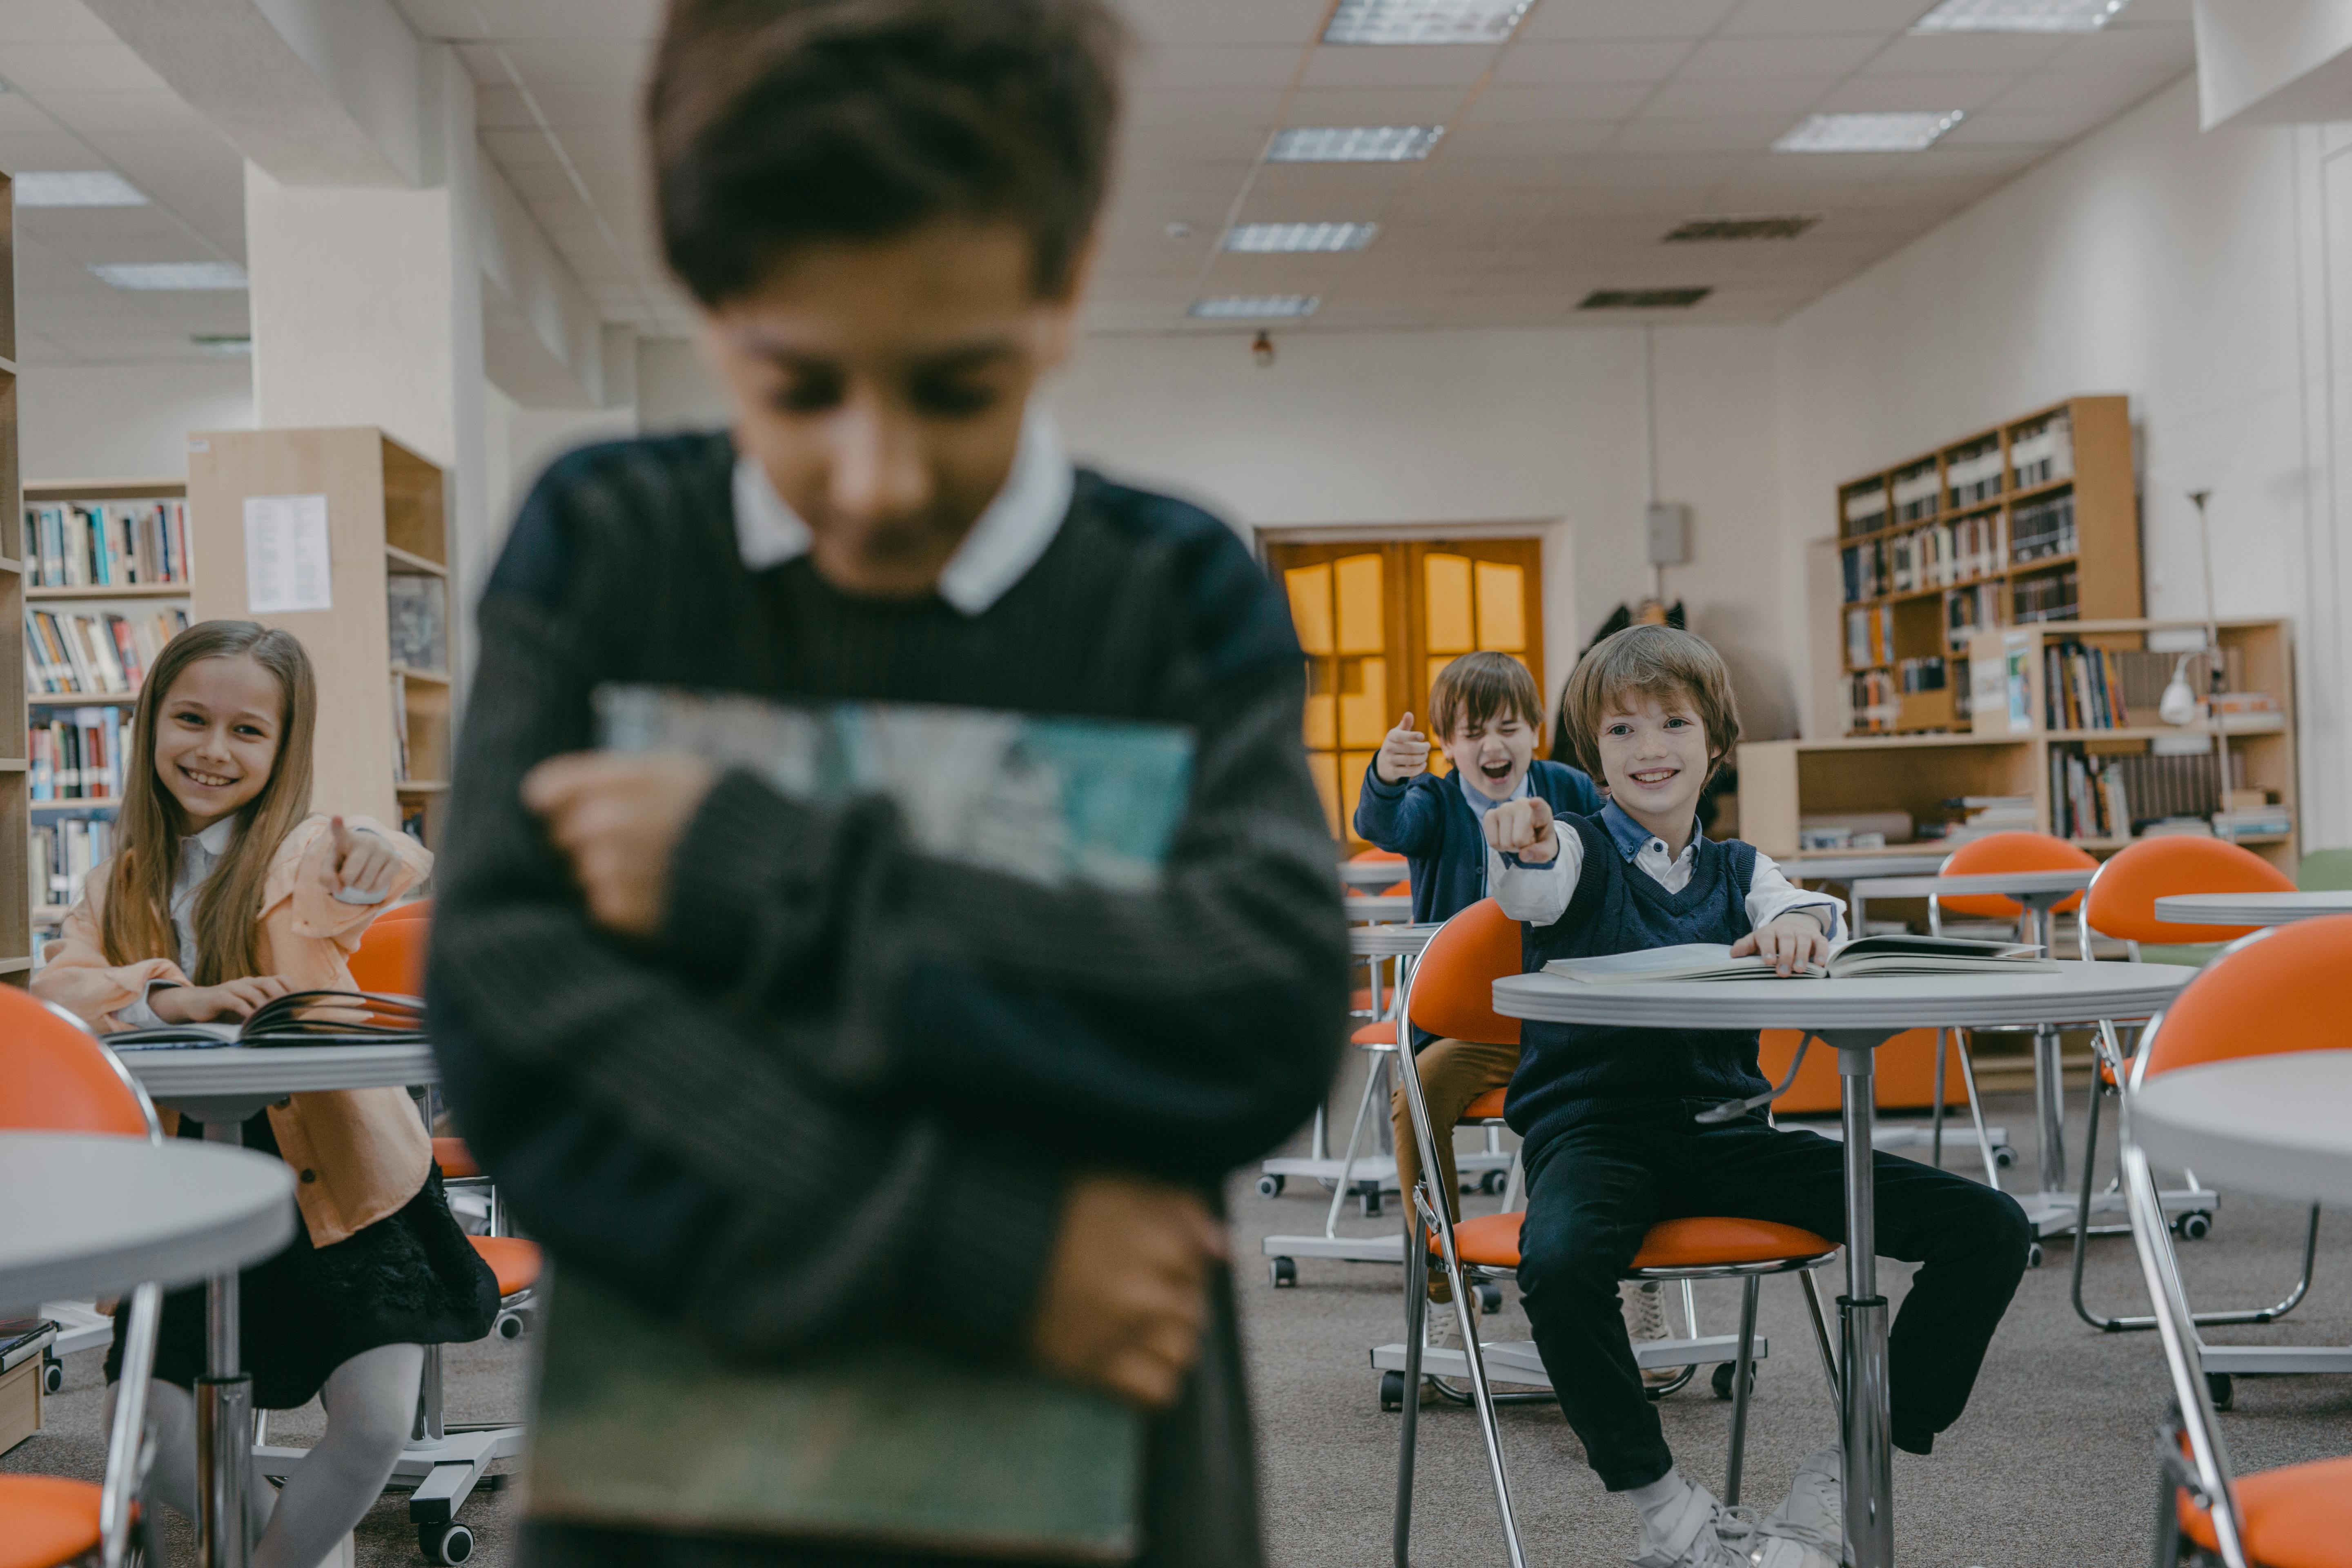 A kid being laughed at by other students | Source: Pexels